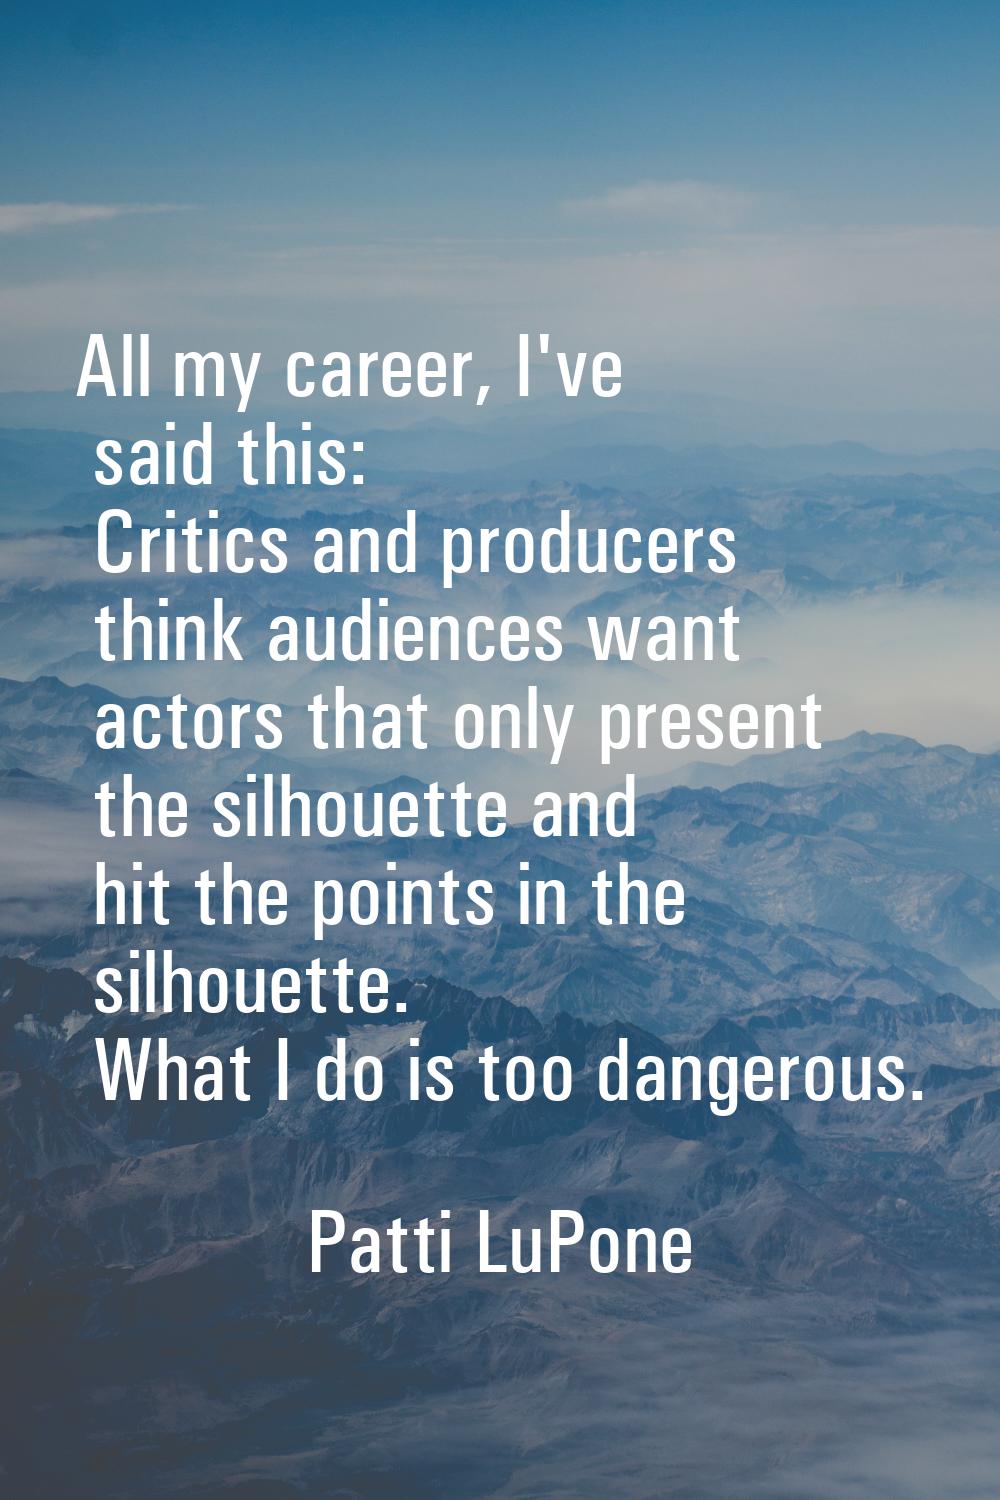 All my career, I've said this: Critics and producers think audiences want actors that only present 